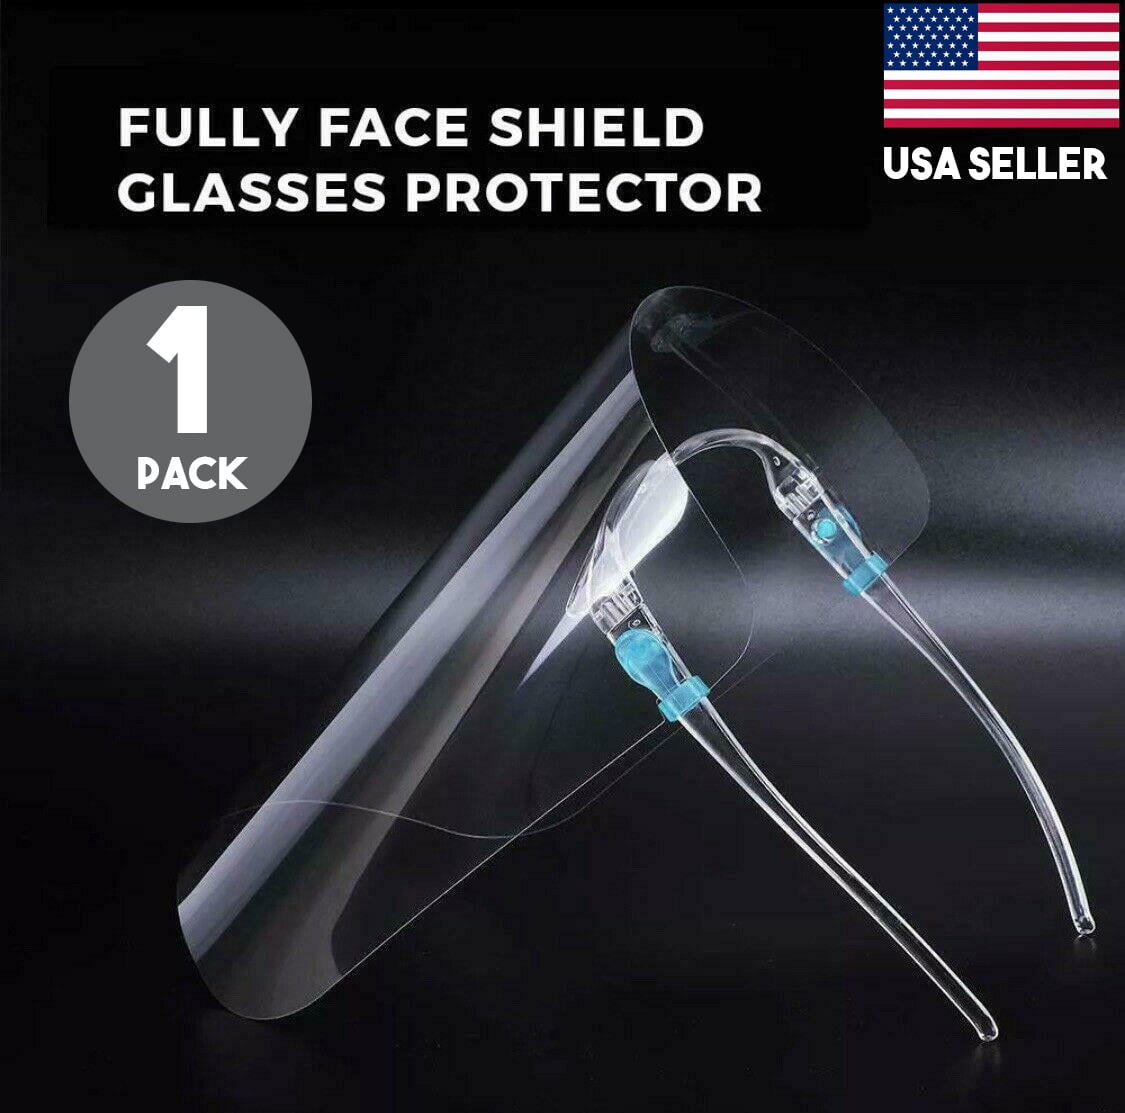 10 Pack Adult Face Shield Clear Frames Safety Glasses AntiFog Shield USA Shipper 